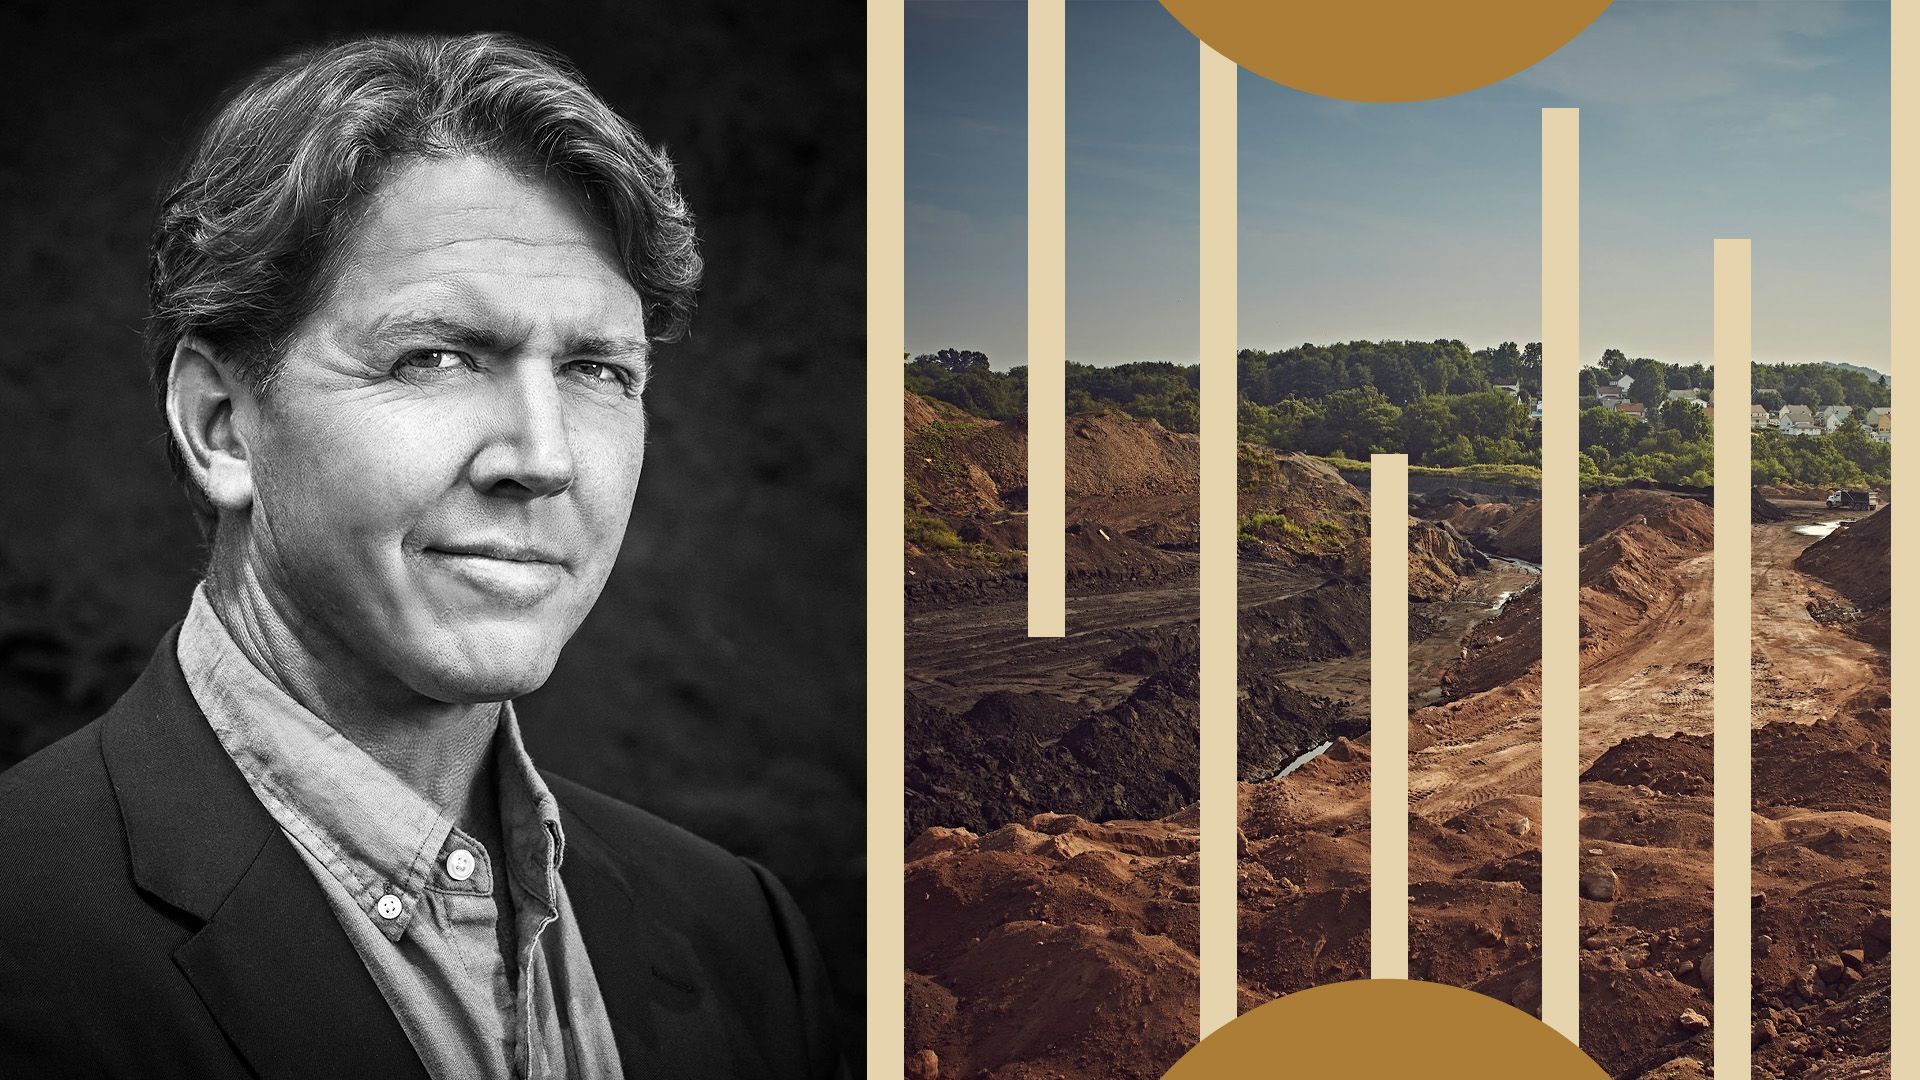 Photo Illustration of Greg Beard of Stronghold next to imagery of waste coal piles